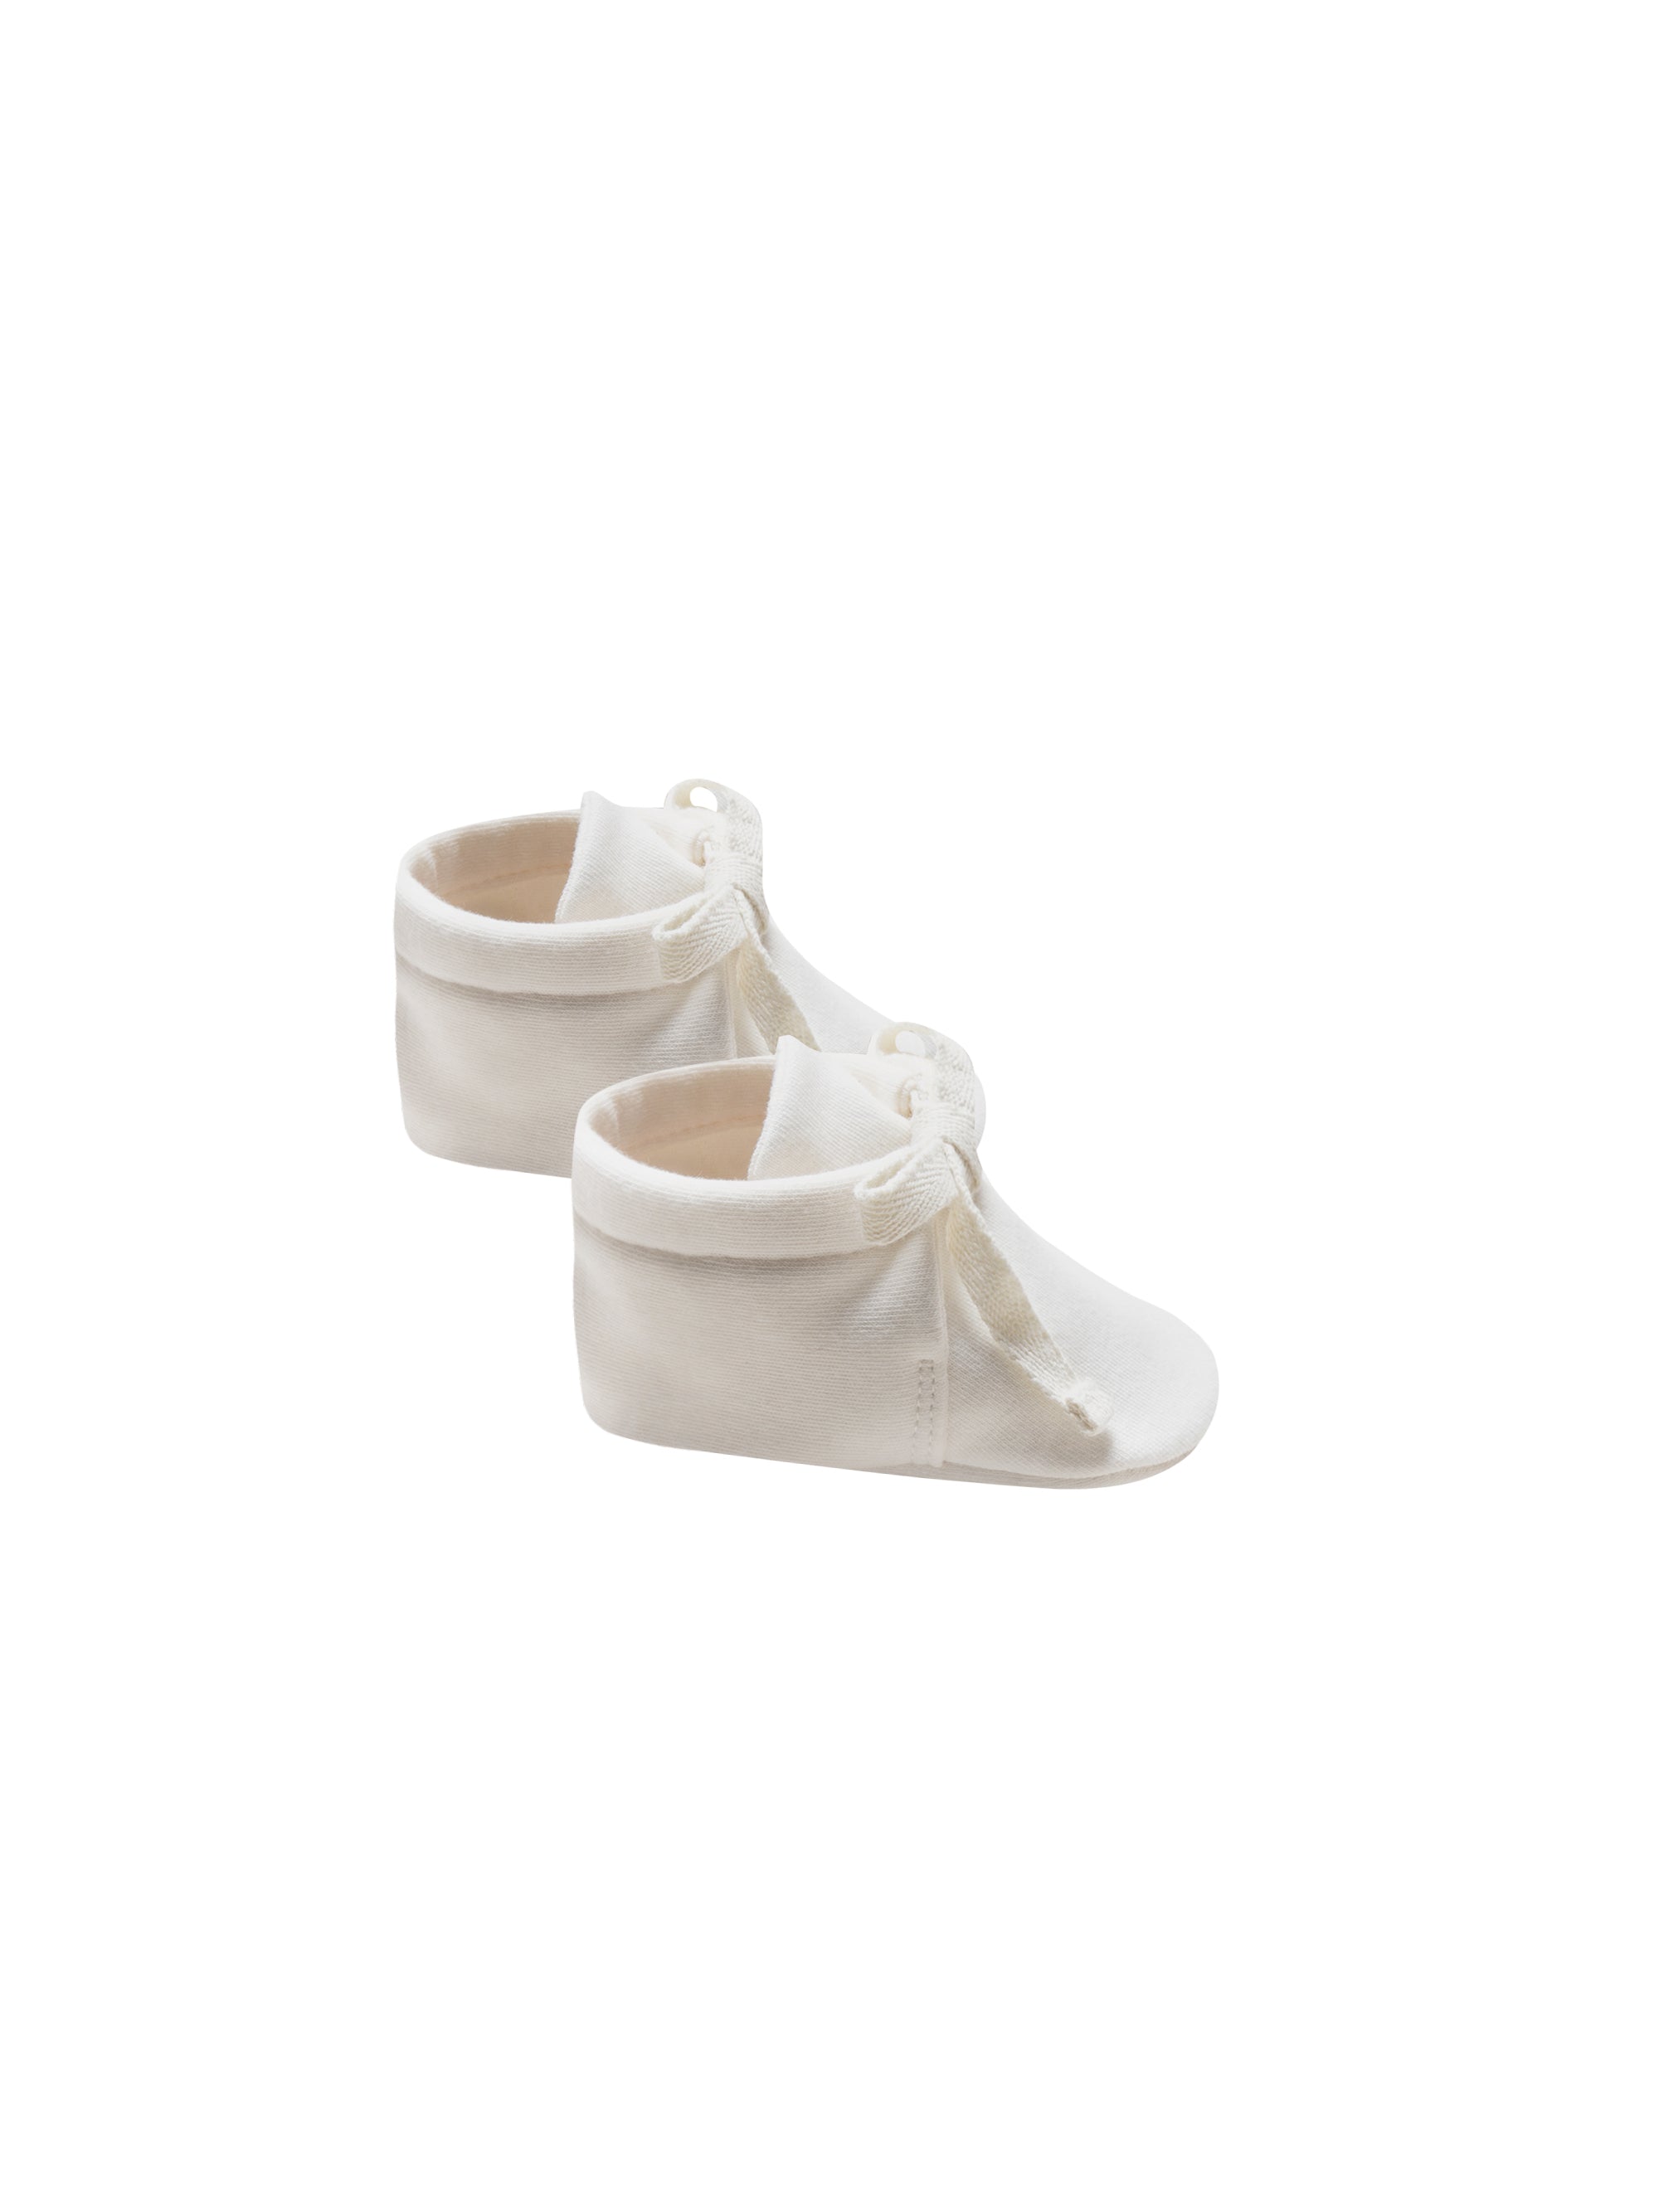 QUINCY MAE baby booties / IVORY